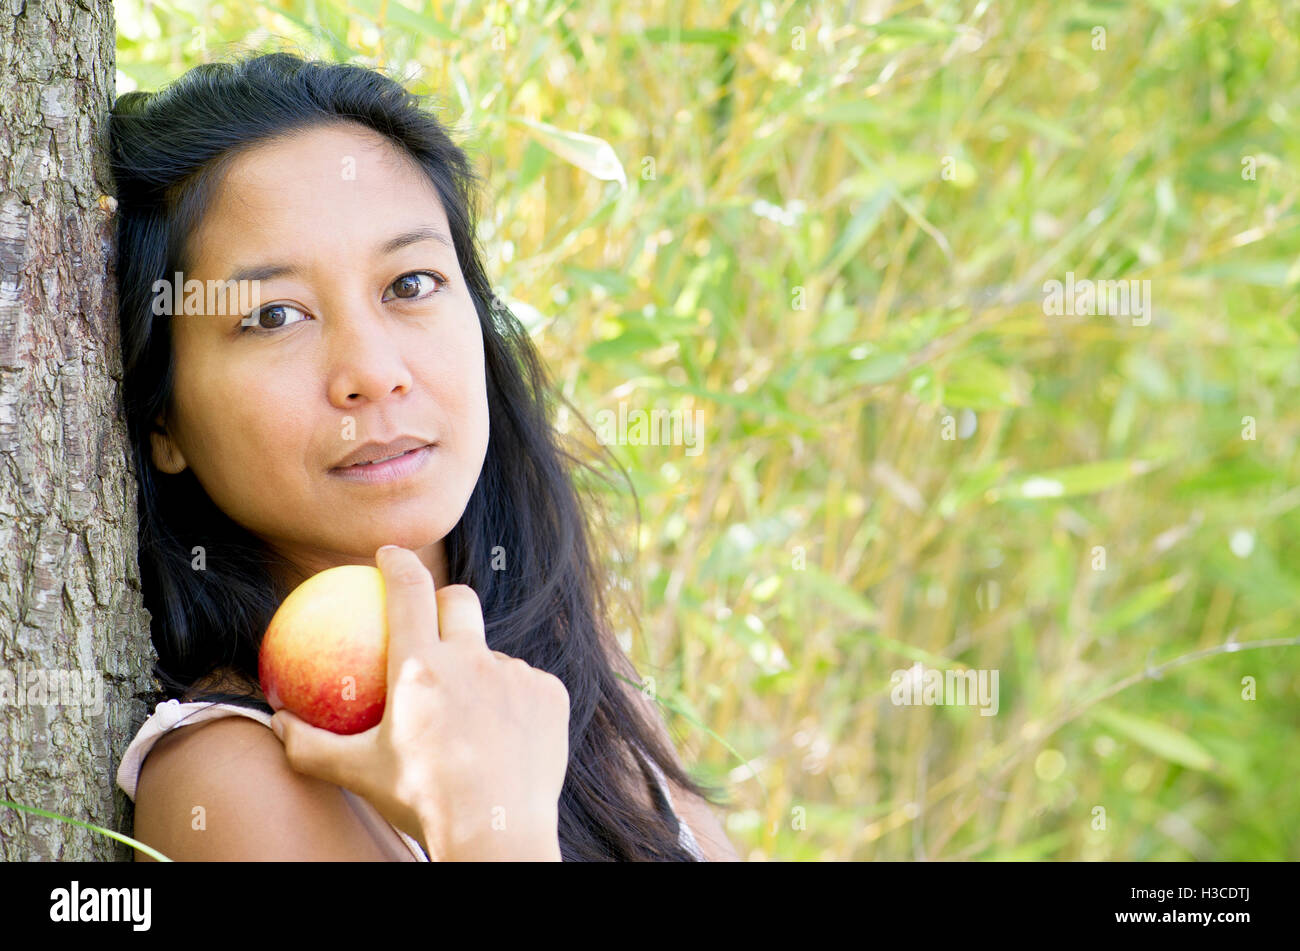 Woman leaning against tree trunk with apple in hand, portrait Stock Photo